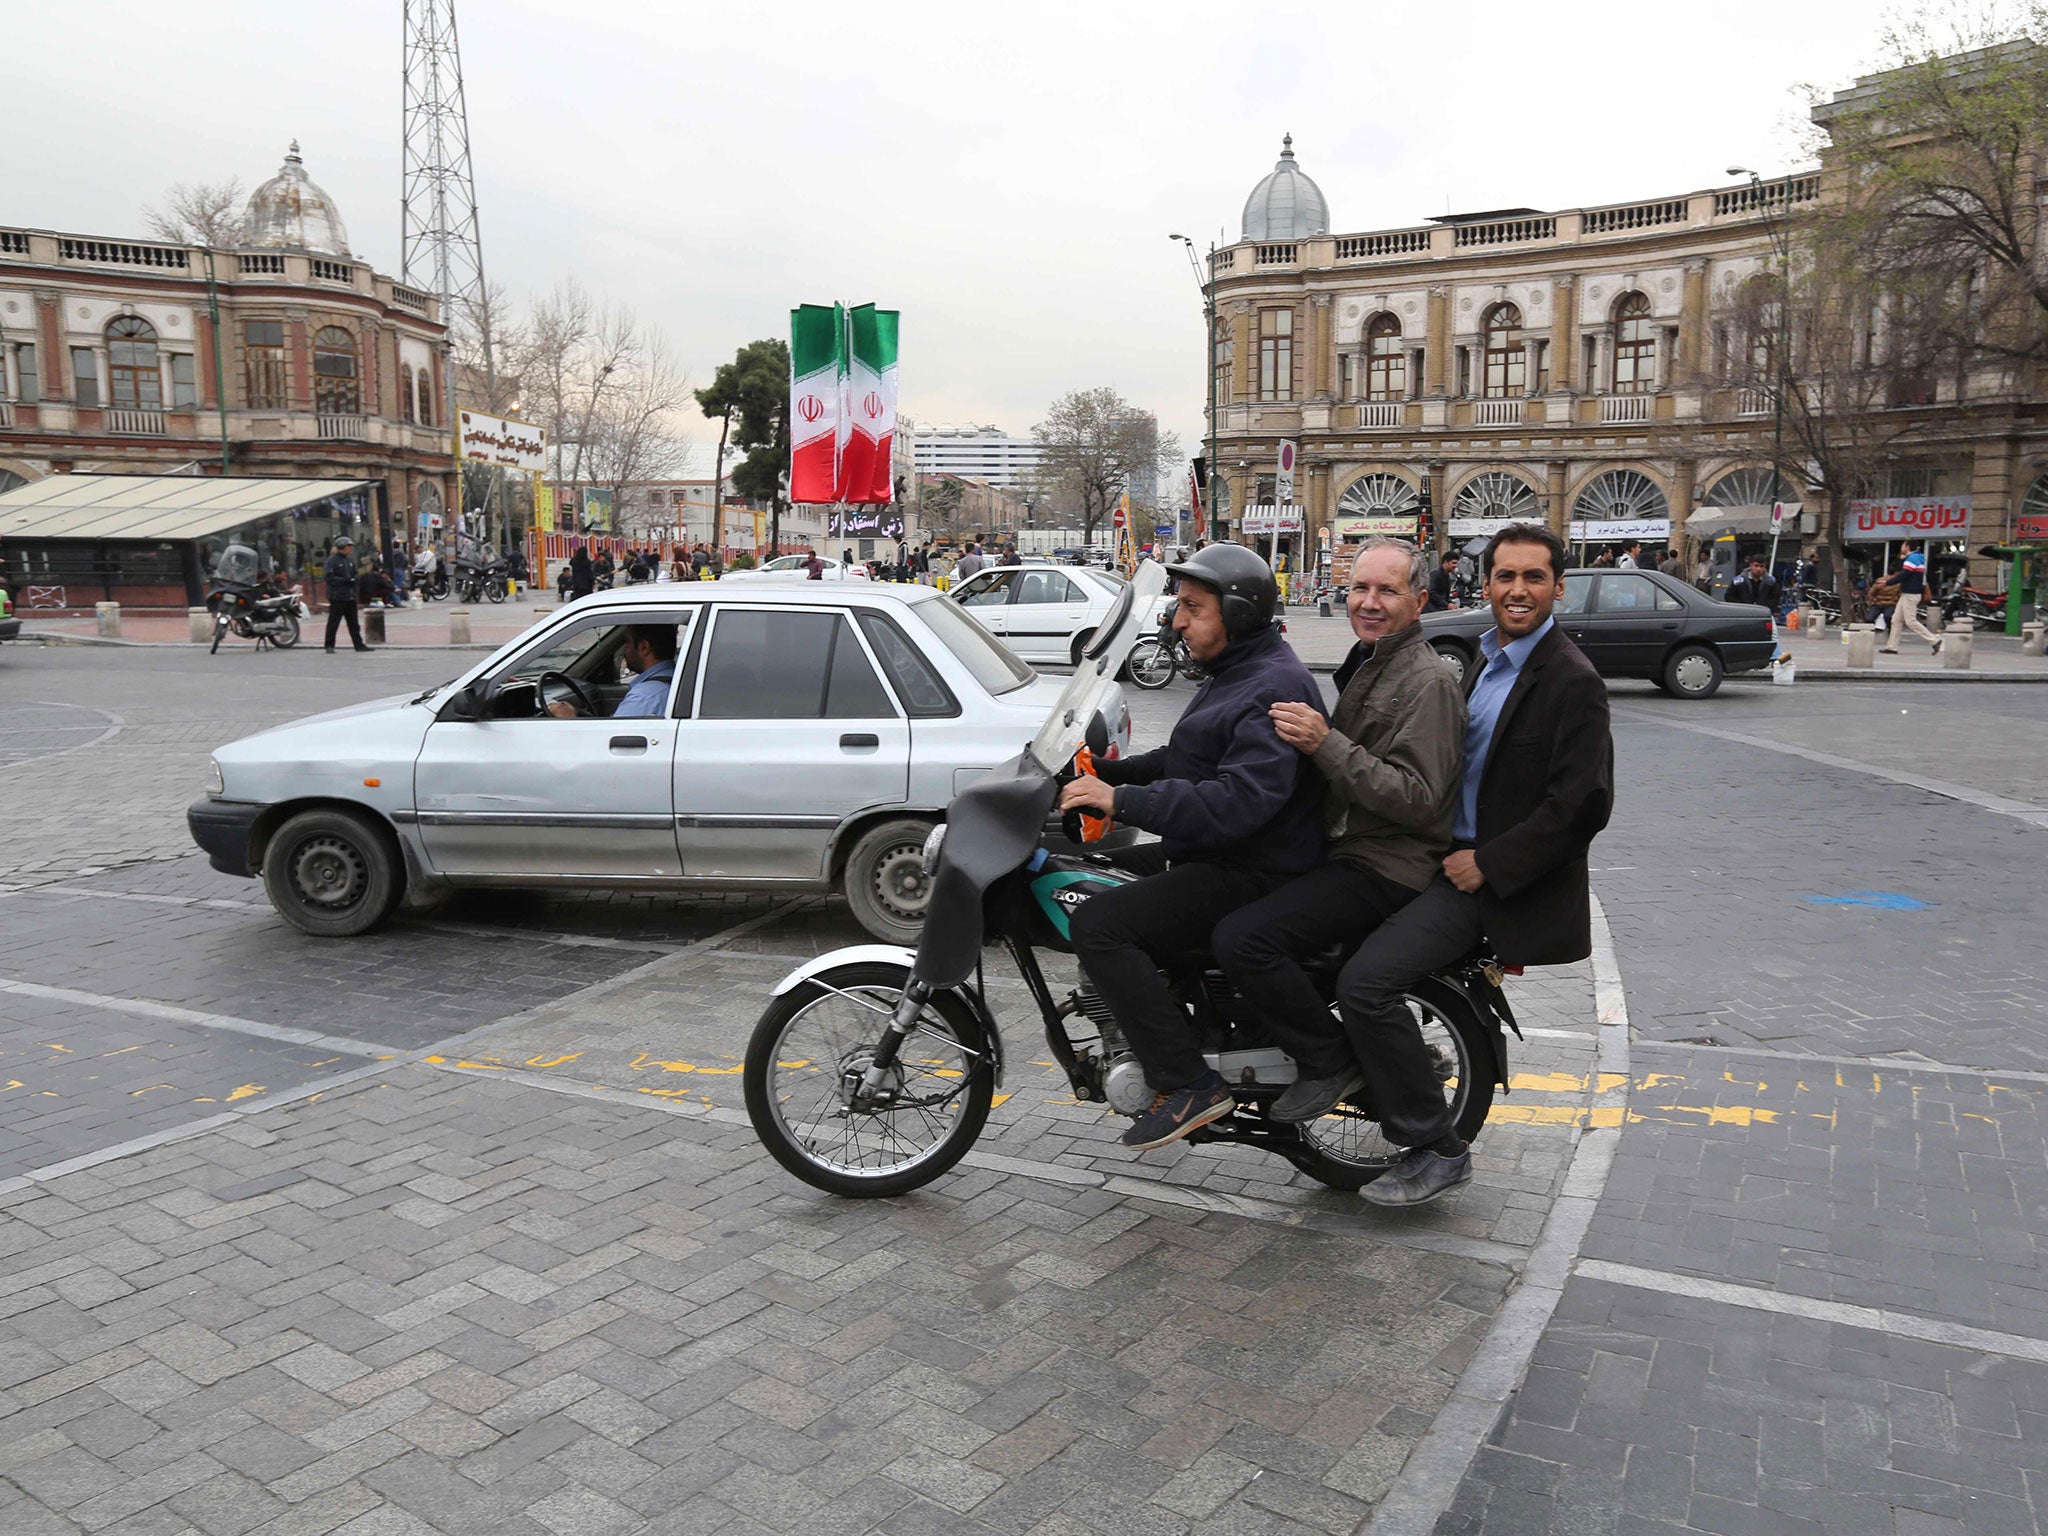 Iranian men take a ride on a motorcycle taxi in central Tehran